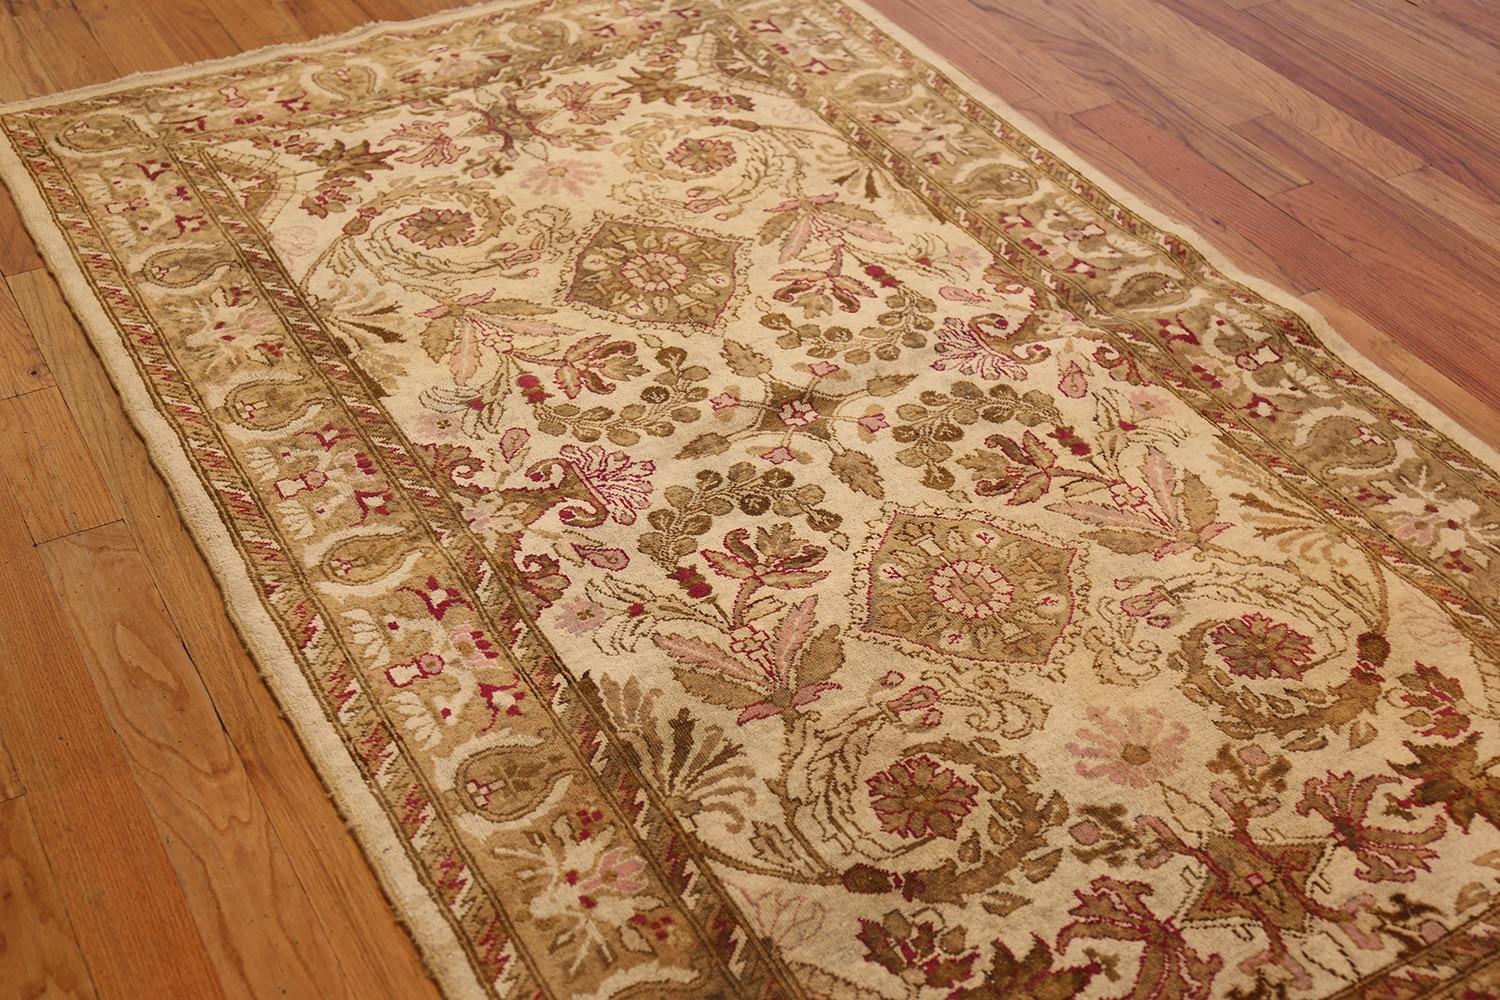 Antique Indian Agra Rug, Origin: India, Circa: Late 19th Century. Size: 4 ft x 6 ft 9 in (1.22 m x 2.06 m)

Lavishly styled, this exquisite antique Indian rug from Agra depicts a magnificent curvilinear arabesque that is rendered in a soft